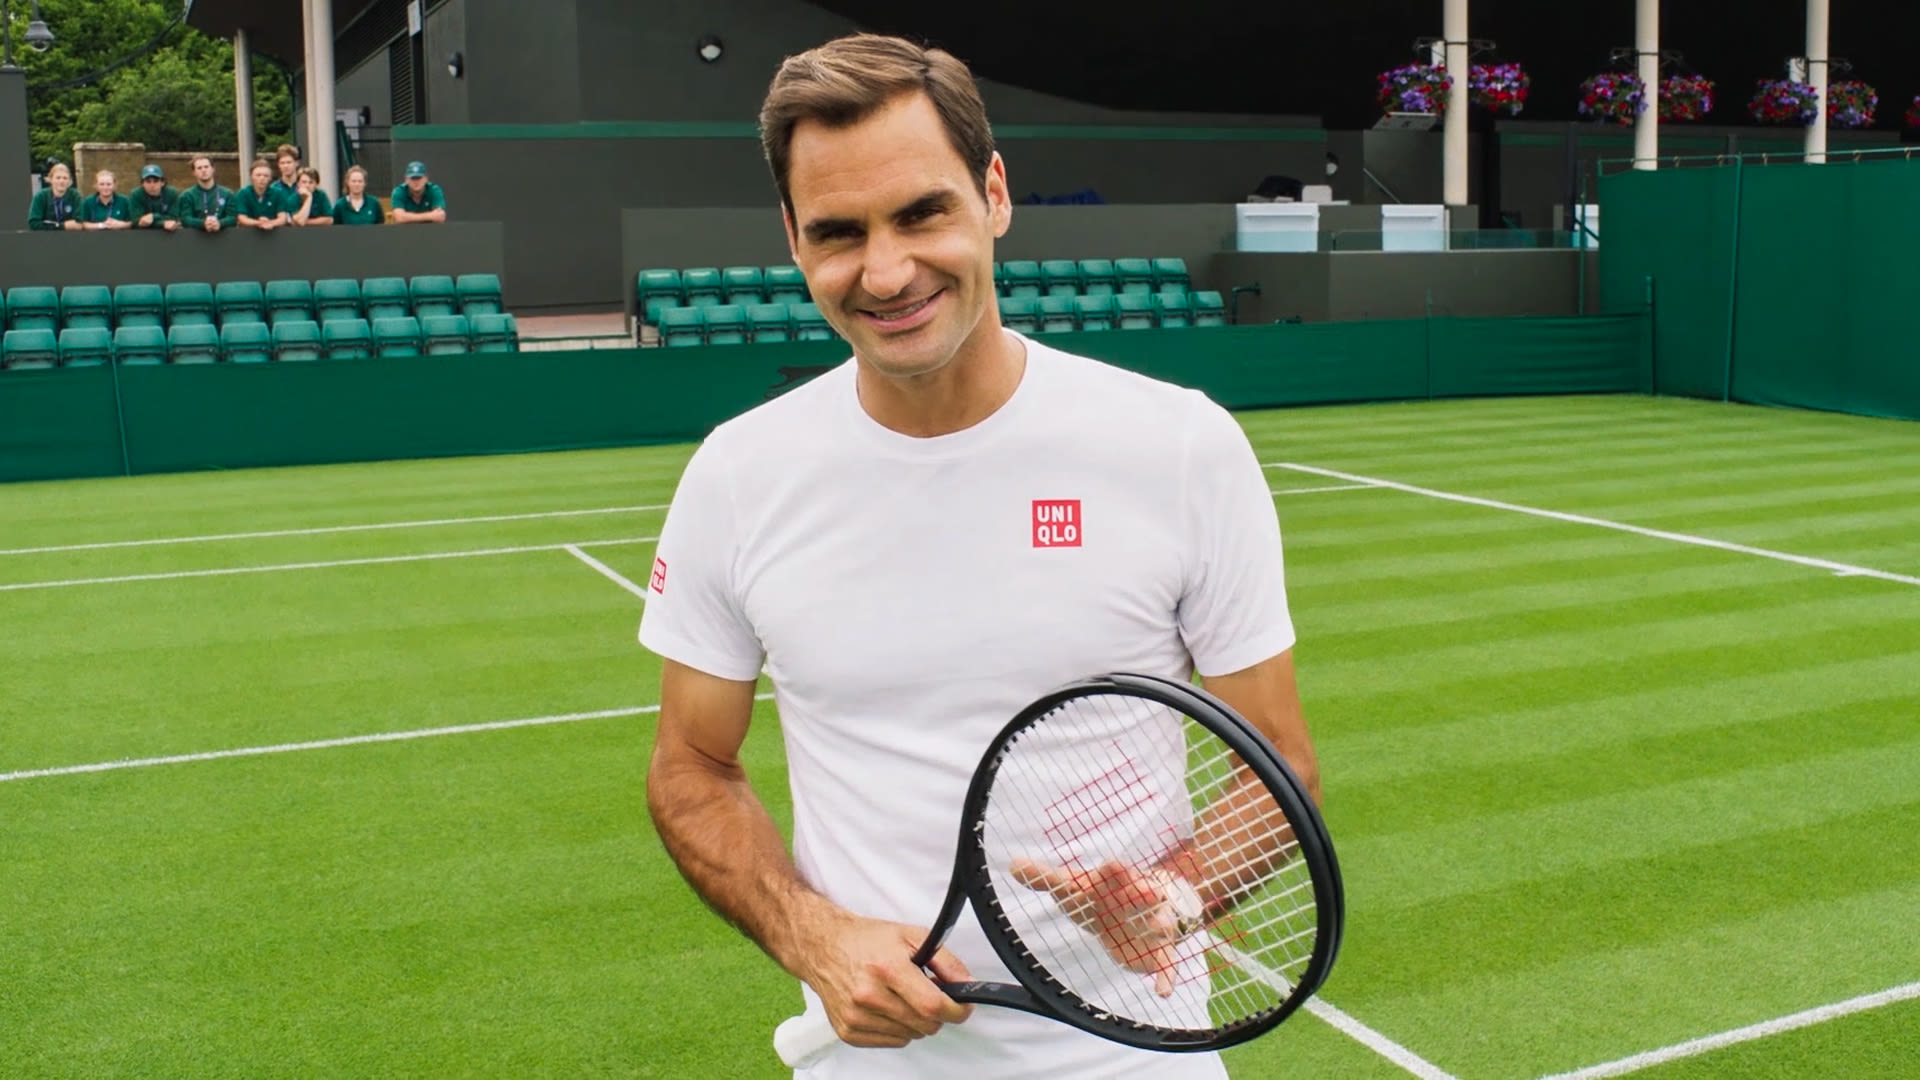 Watch Roger Federer on Wimbledon, the Perfect Serve, and His Love